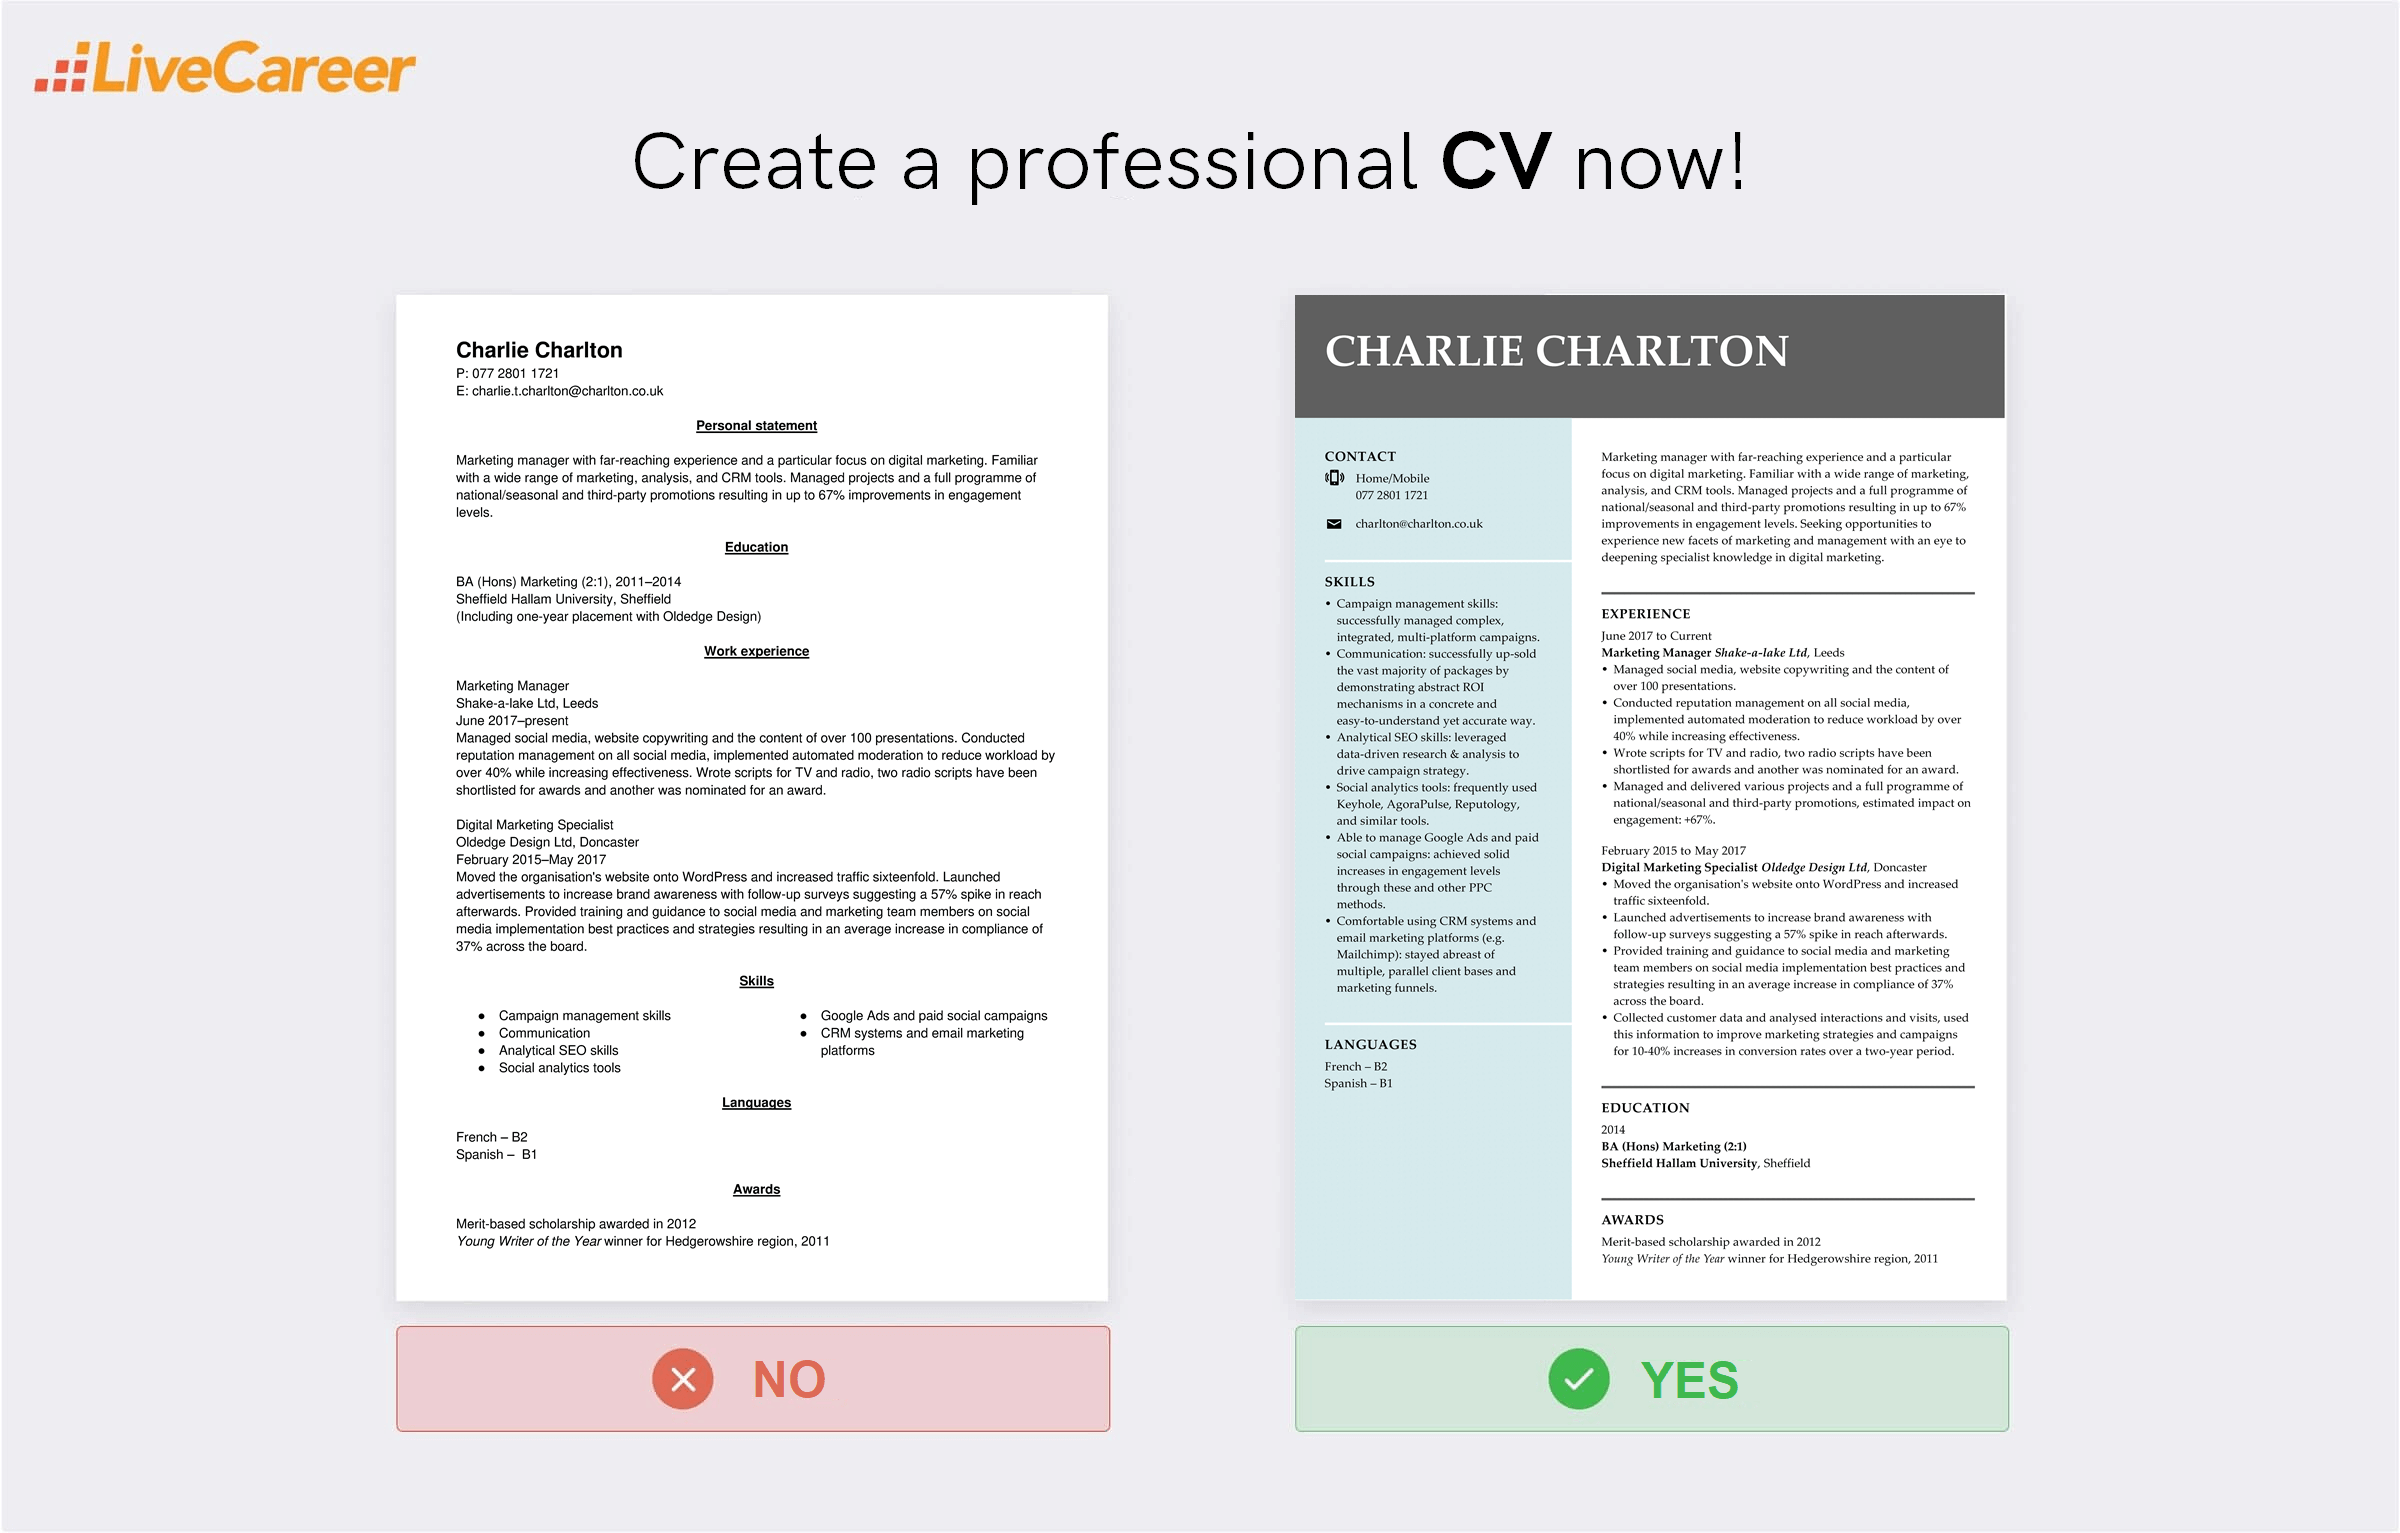 Best List of Hobbies and Interests for Your CV (+Examples)